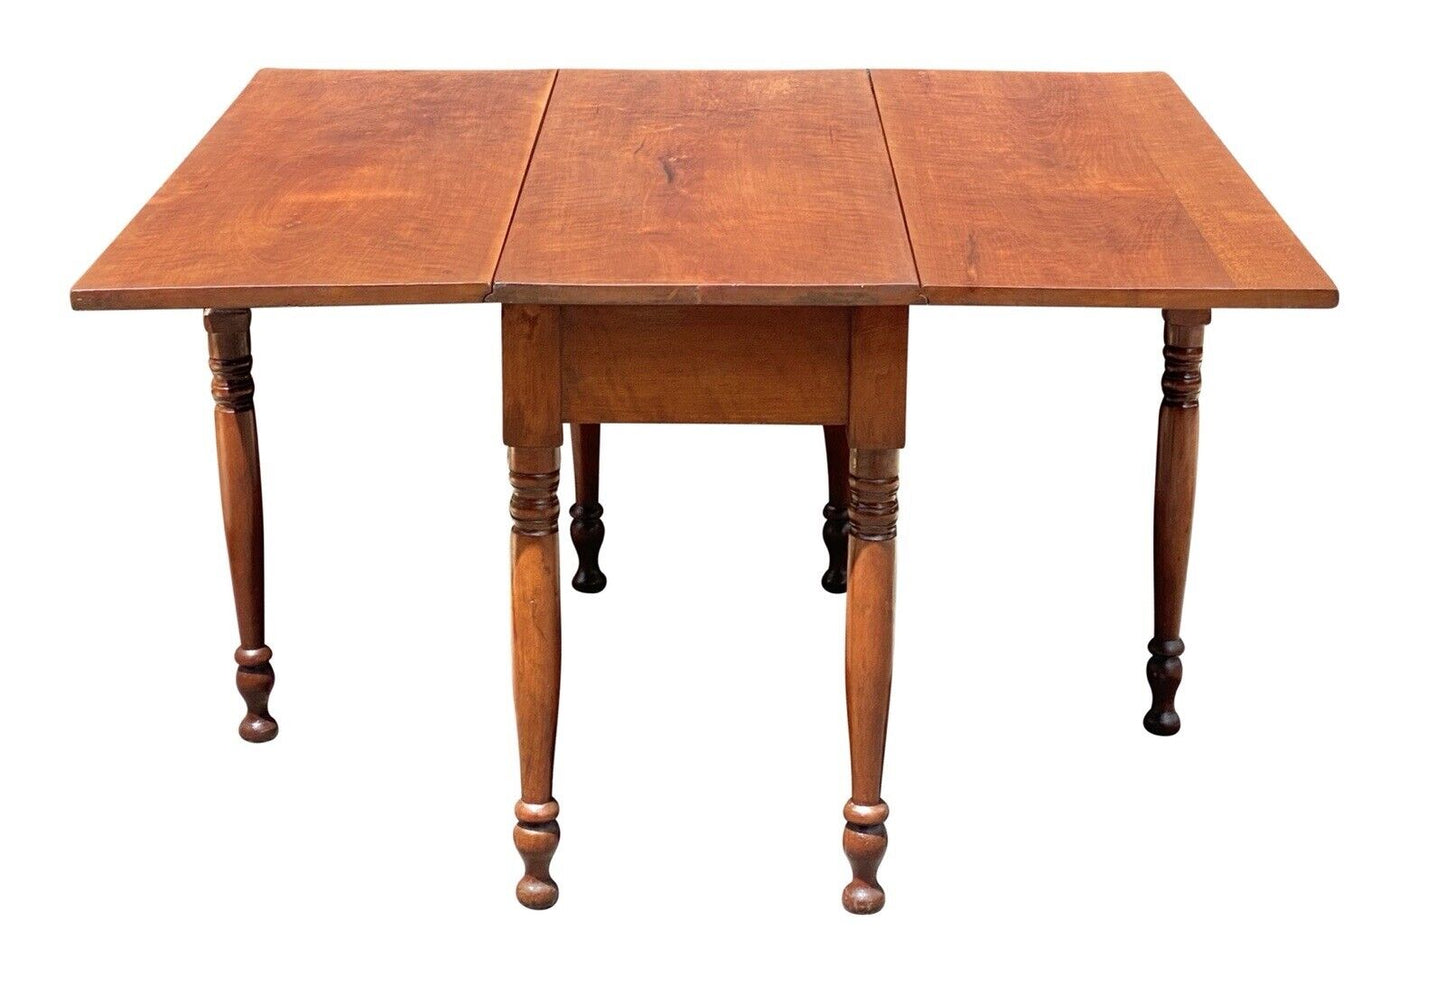 19th C Antique Sheraton Figured Cherry Drop Leaf Dining Table - 52" Long